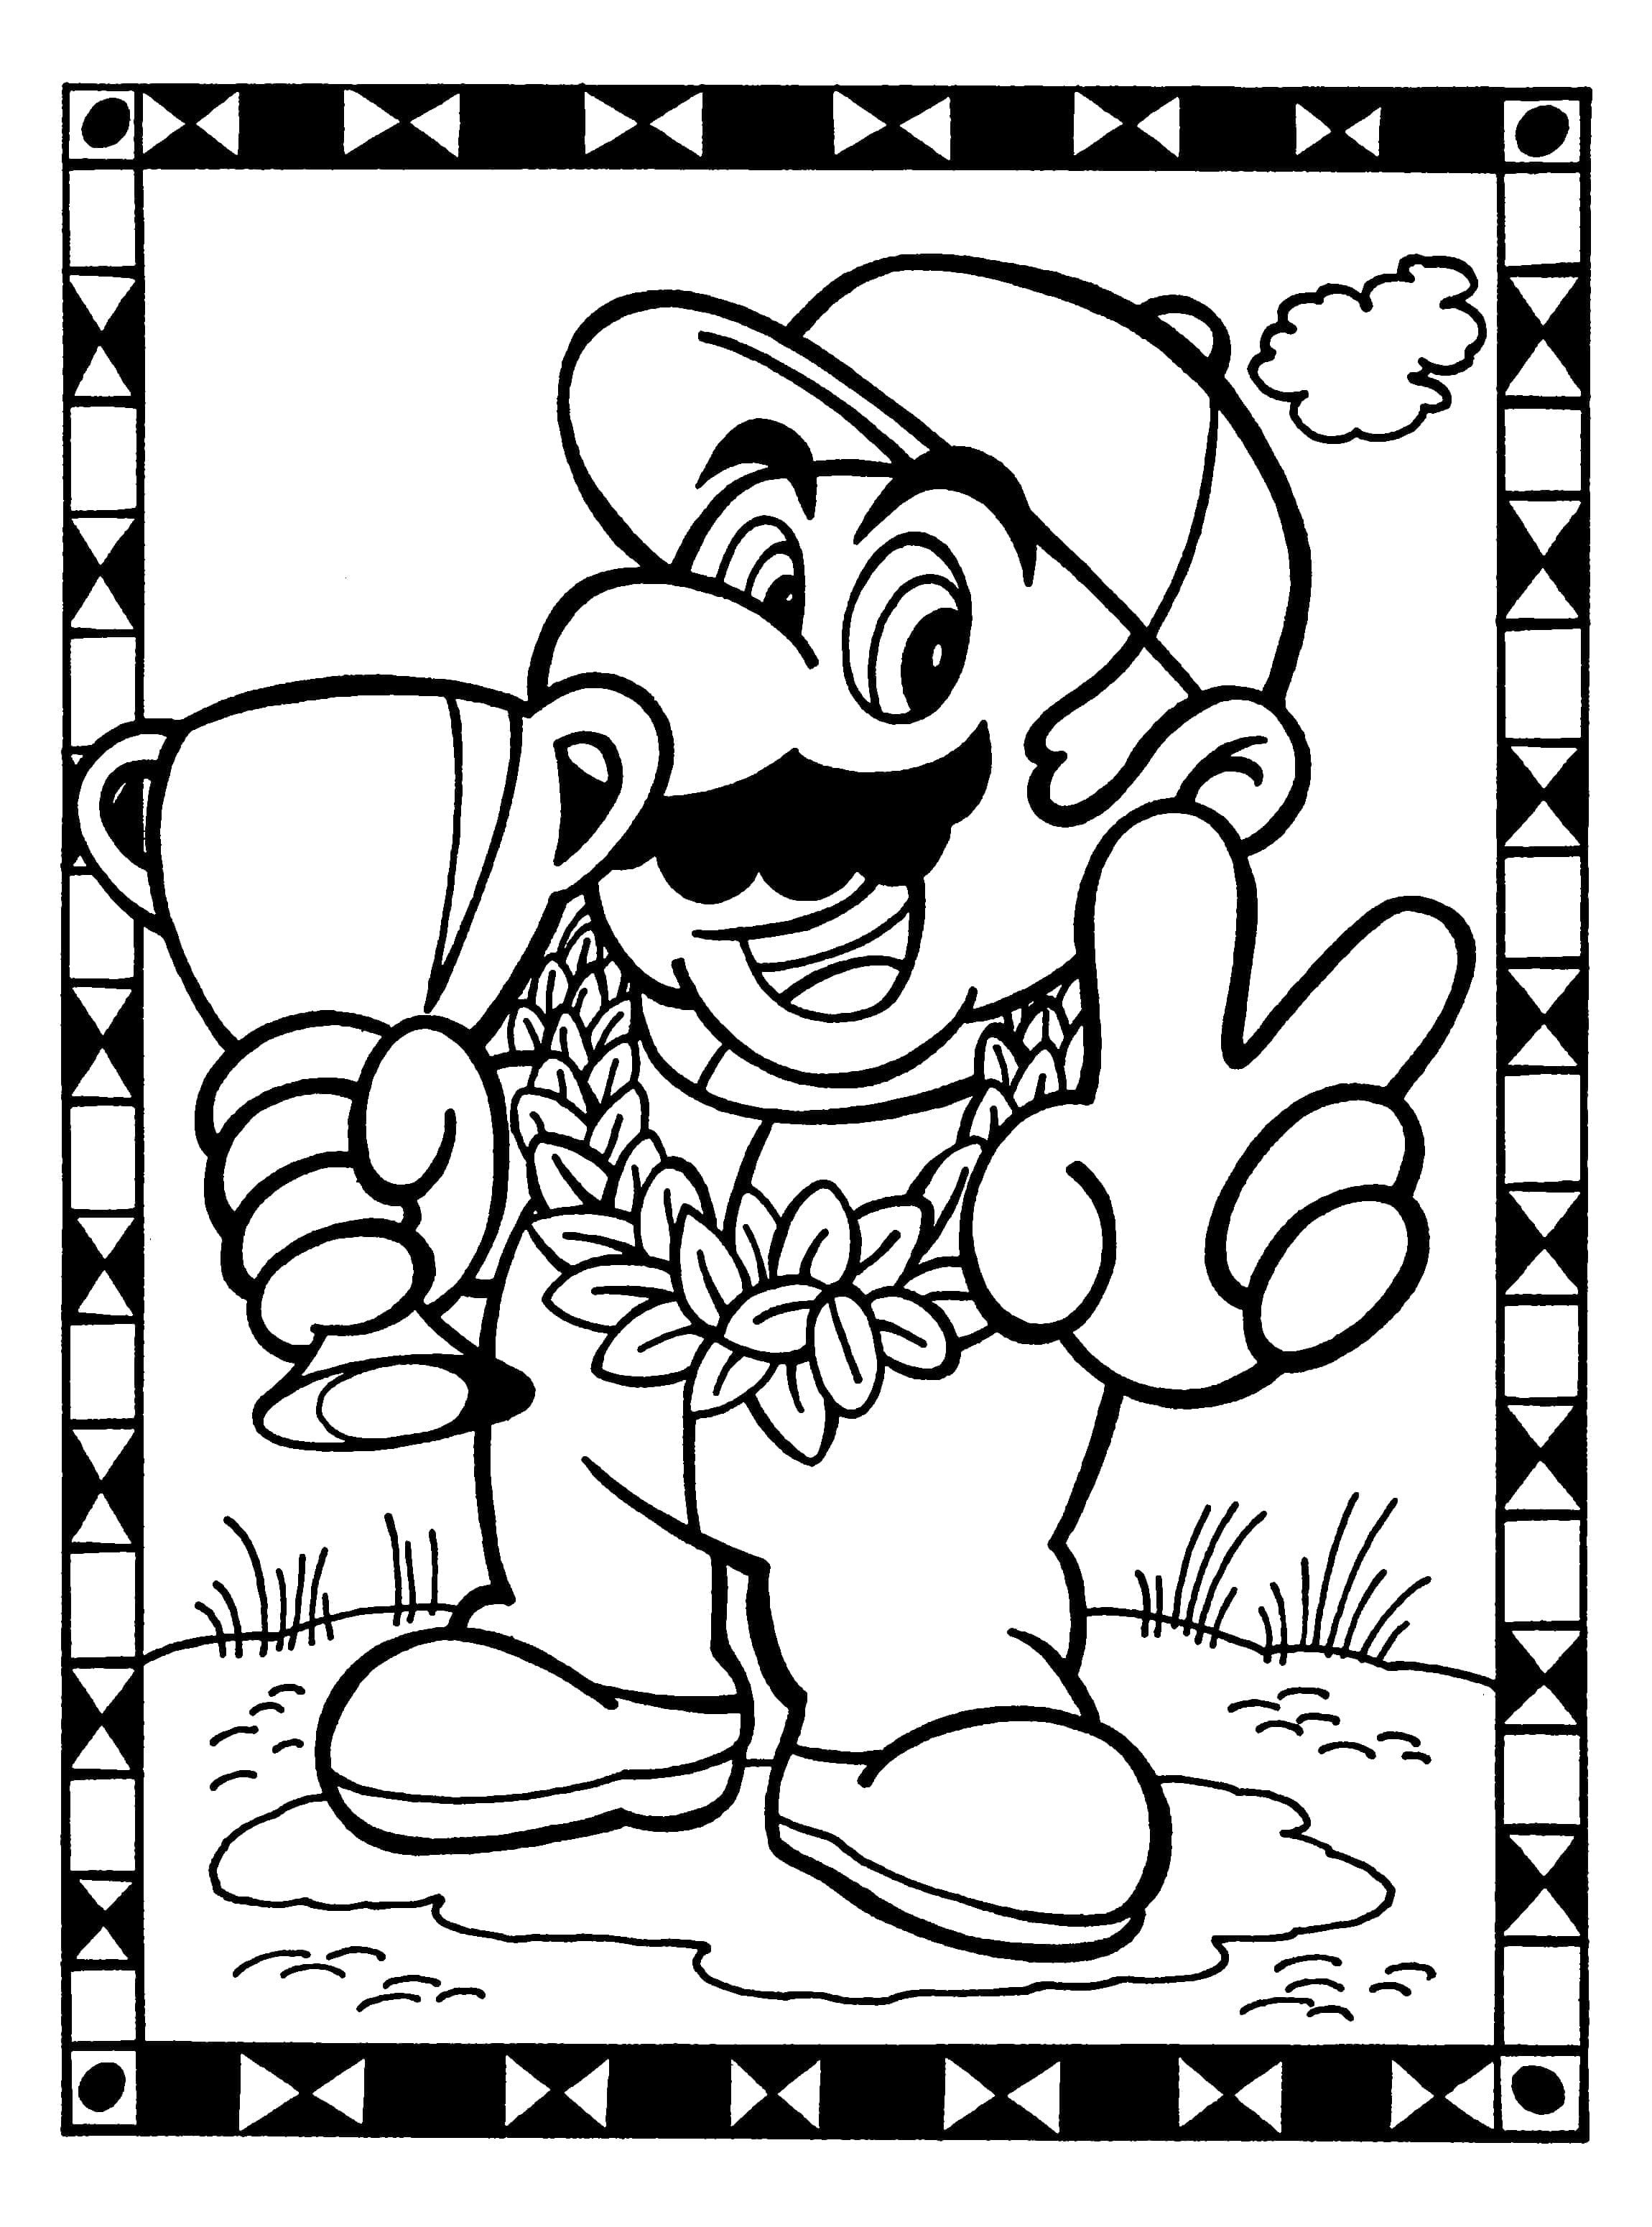 Super Mario 11 from Super Mario coloring page to print and color